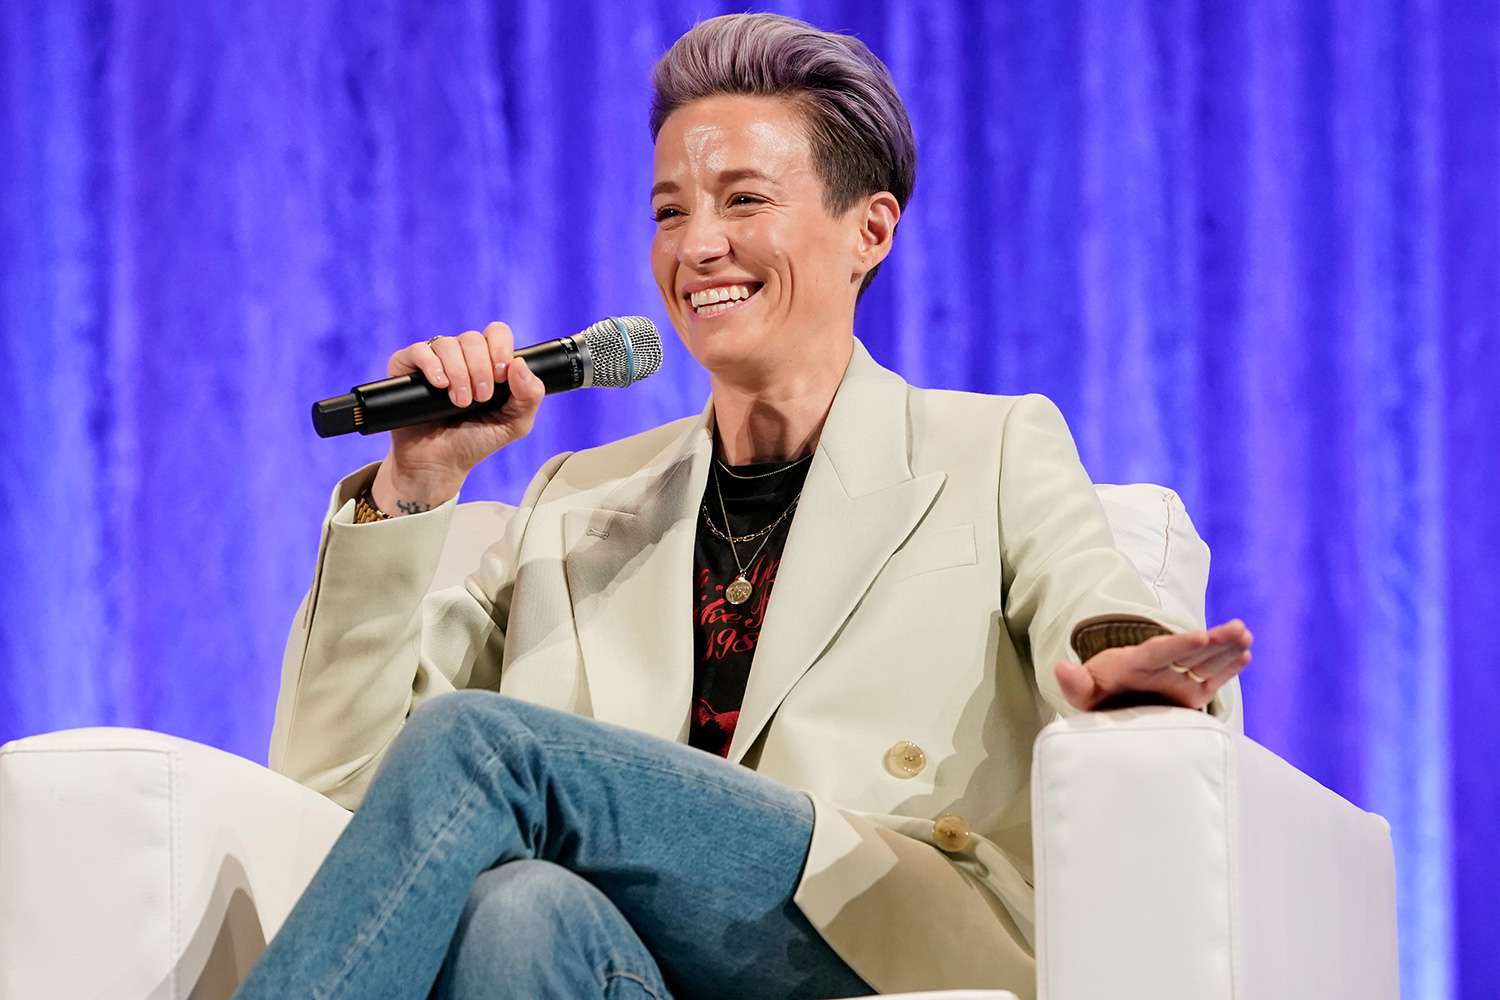 Megan Rapinoe speaks on stage during Watermark Conference For Women 2020 at San Jose Convention Center on February 12, 2020 in San Jose, California